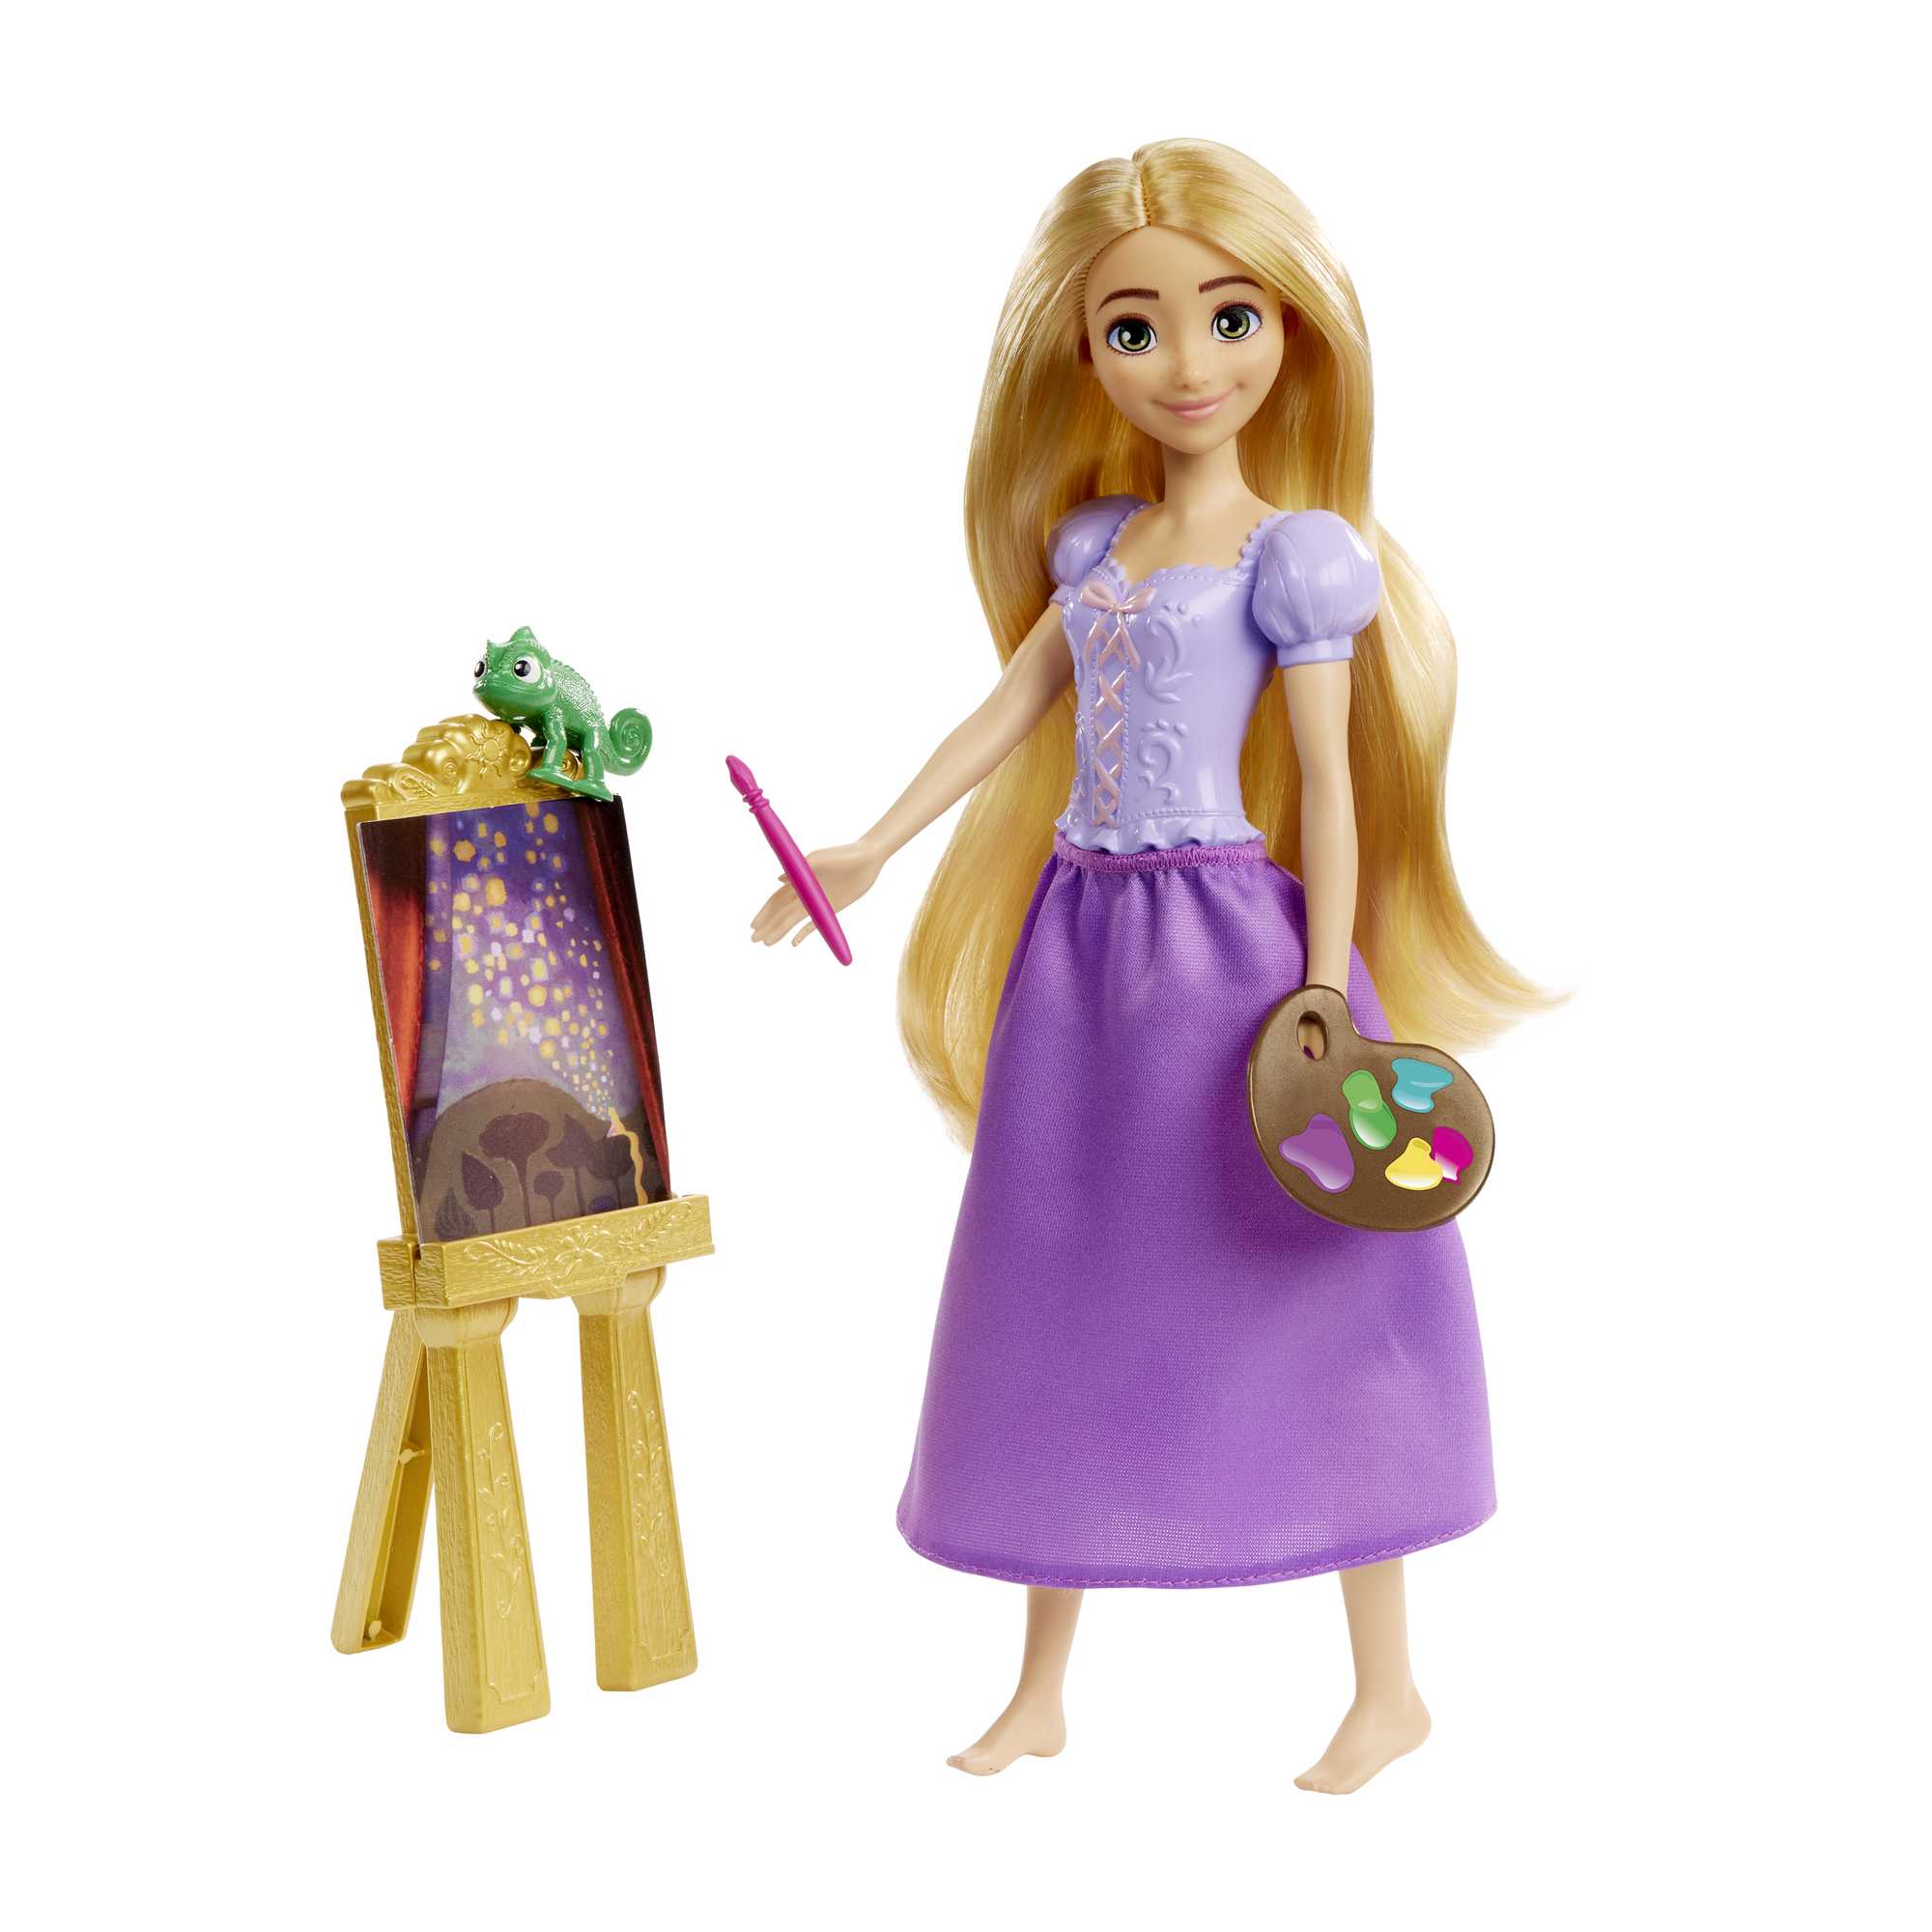 Disney Princess Rapunzel Fashion Doll, Character Friend and 3 Accessories - image 1 of 6